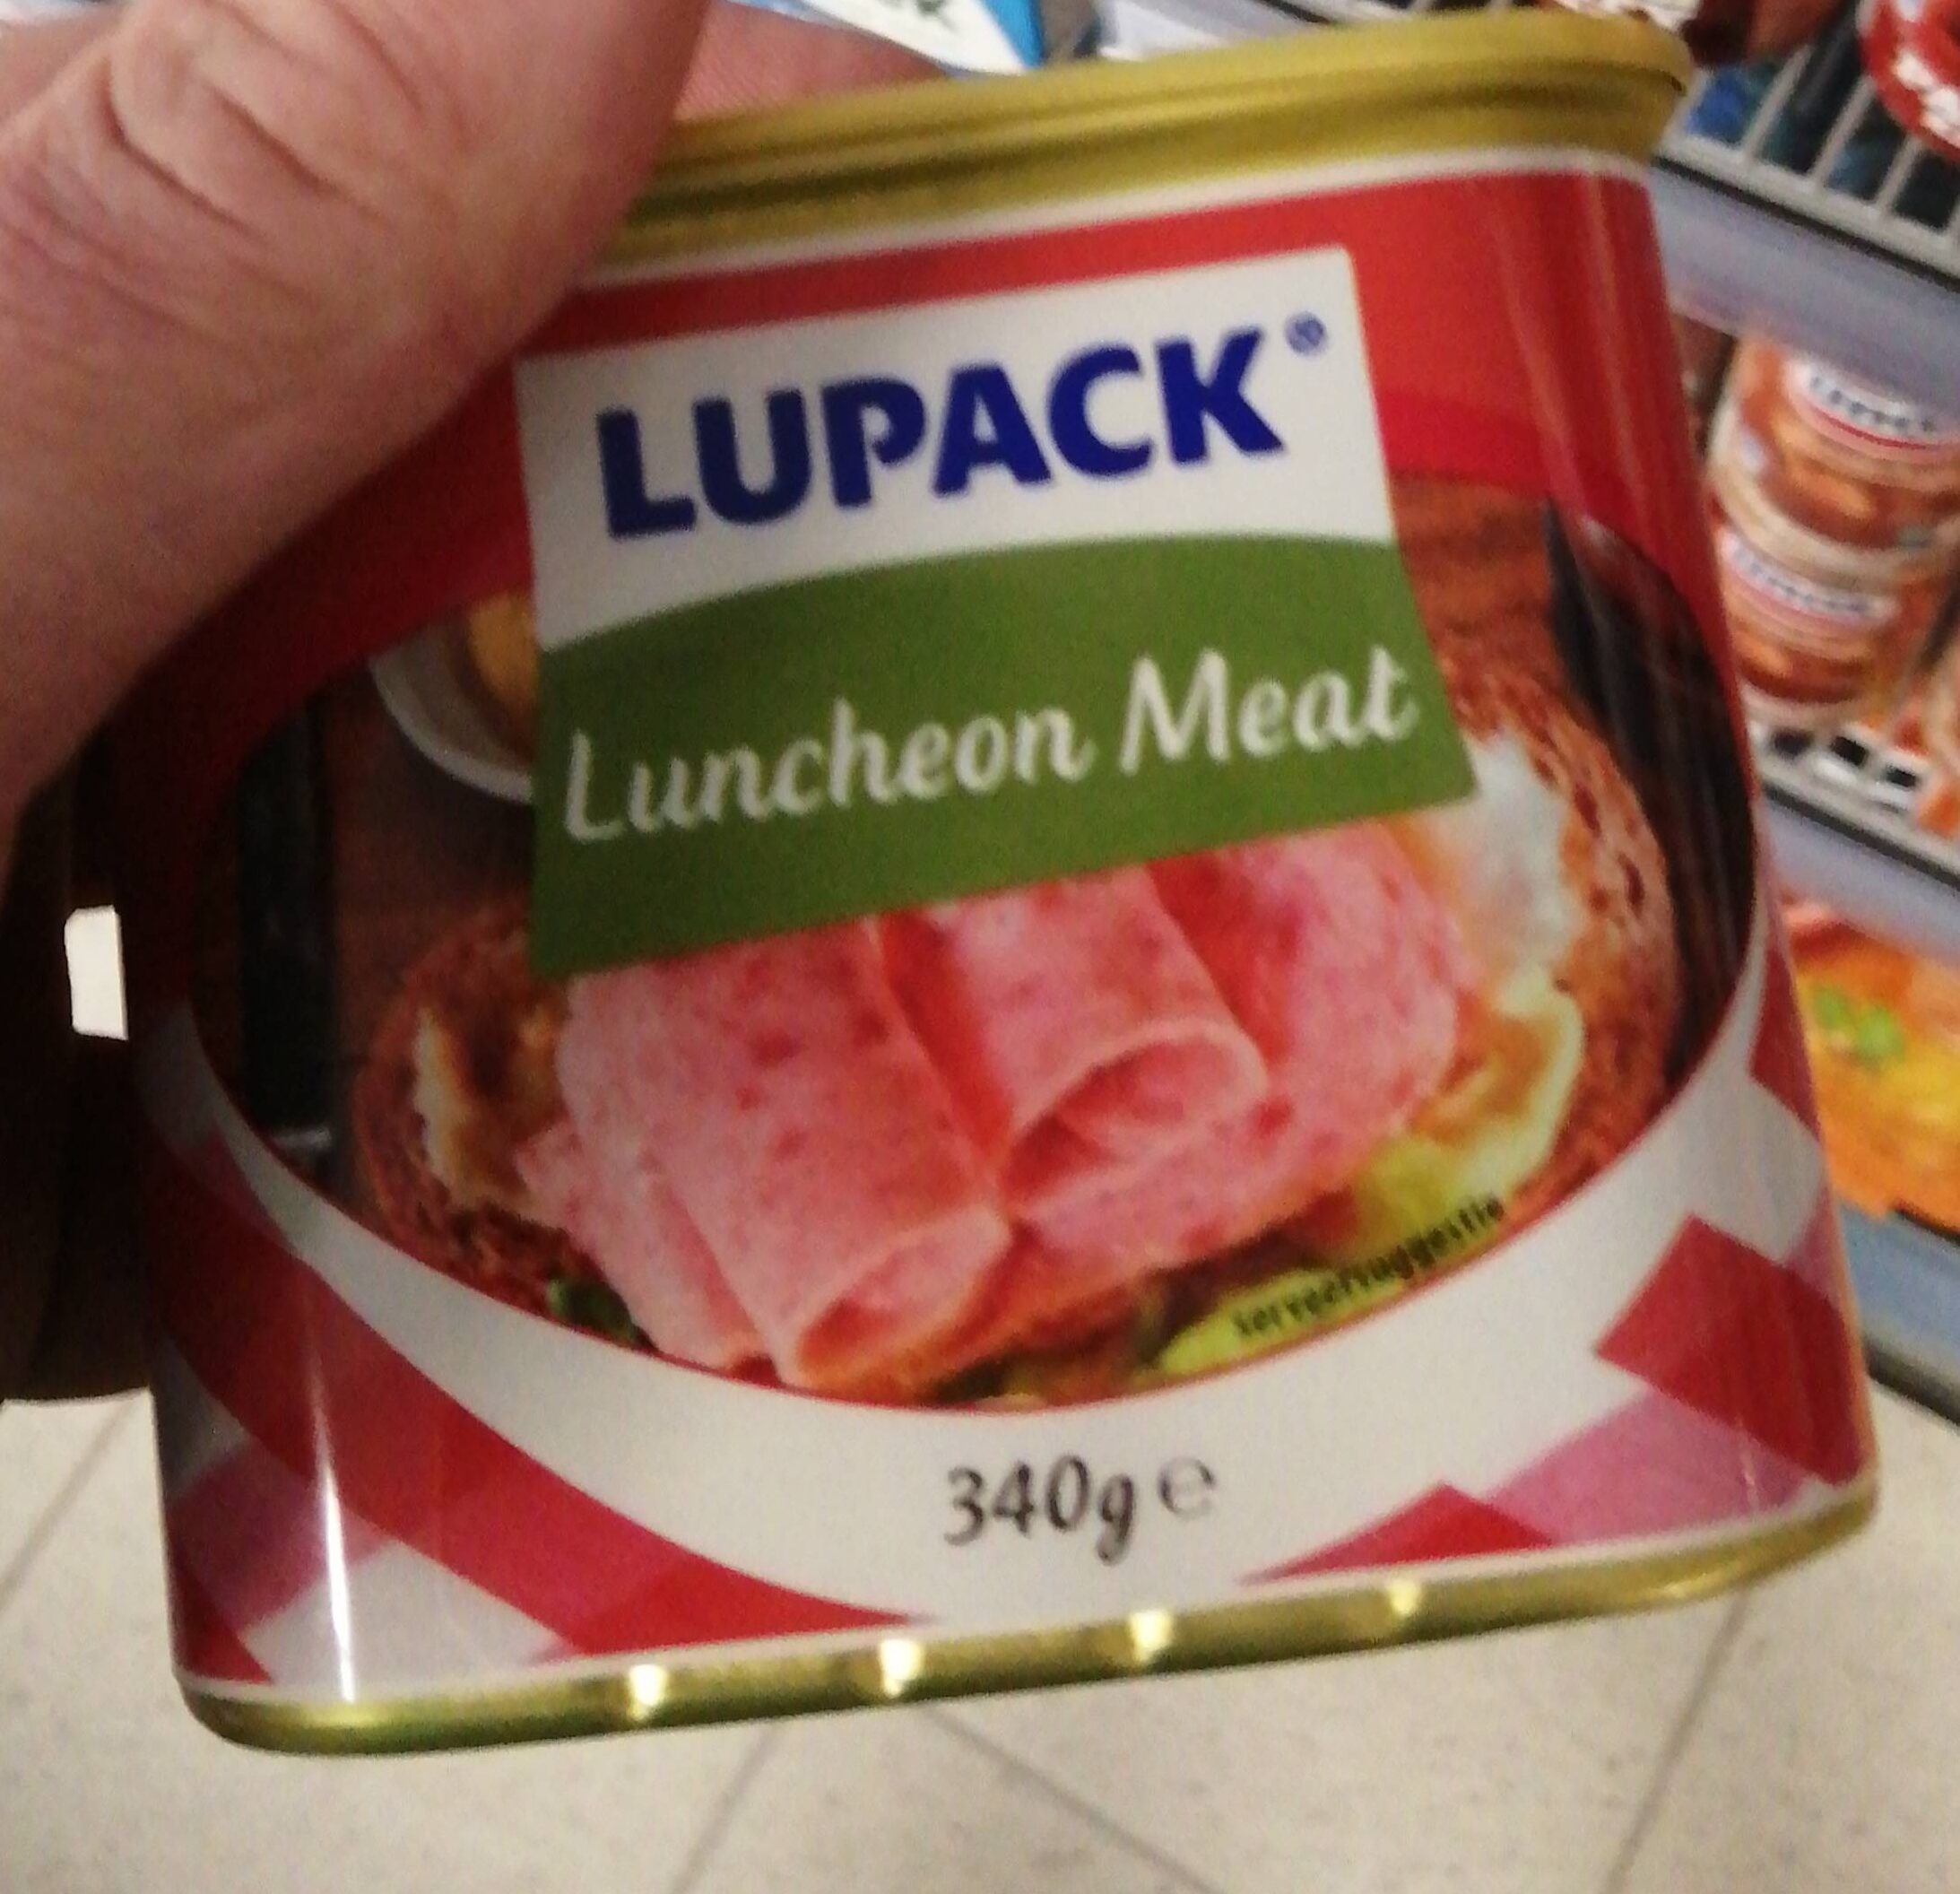 Lupack luncheon meat - Product